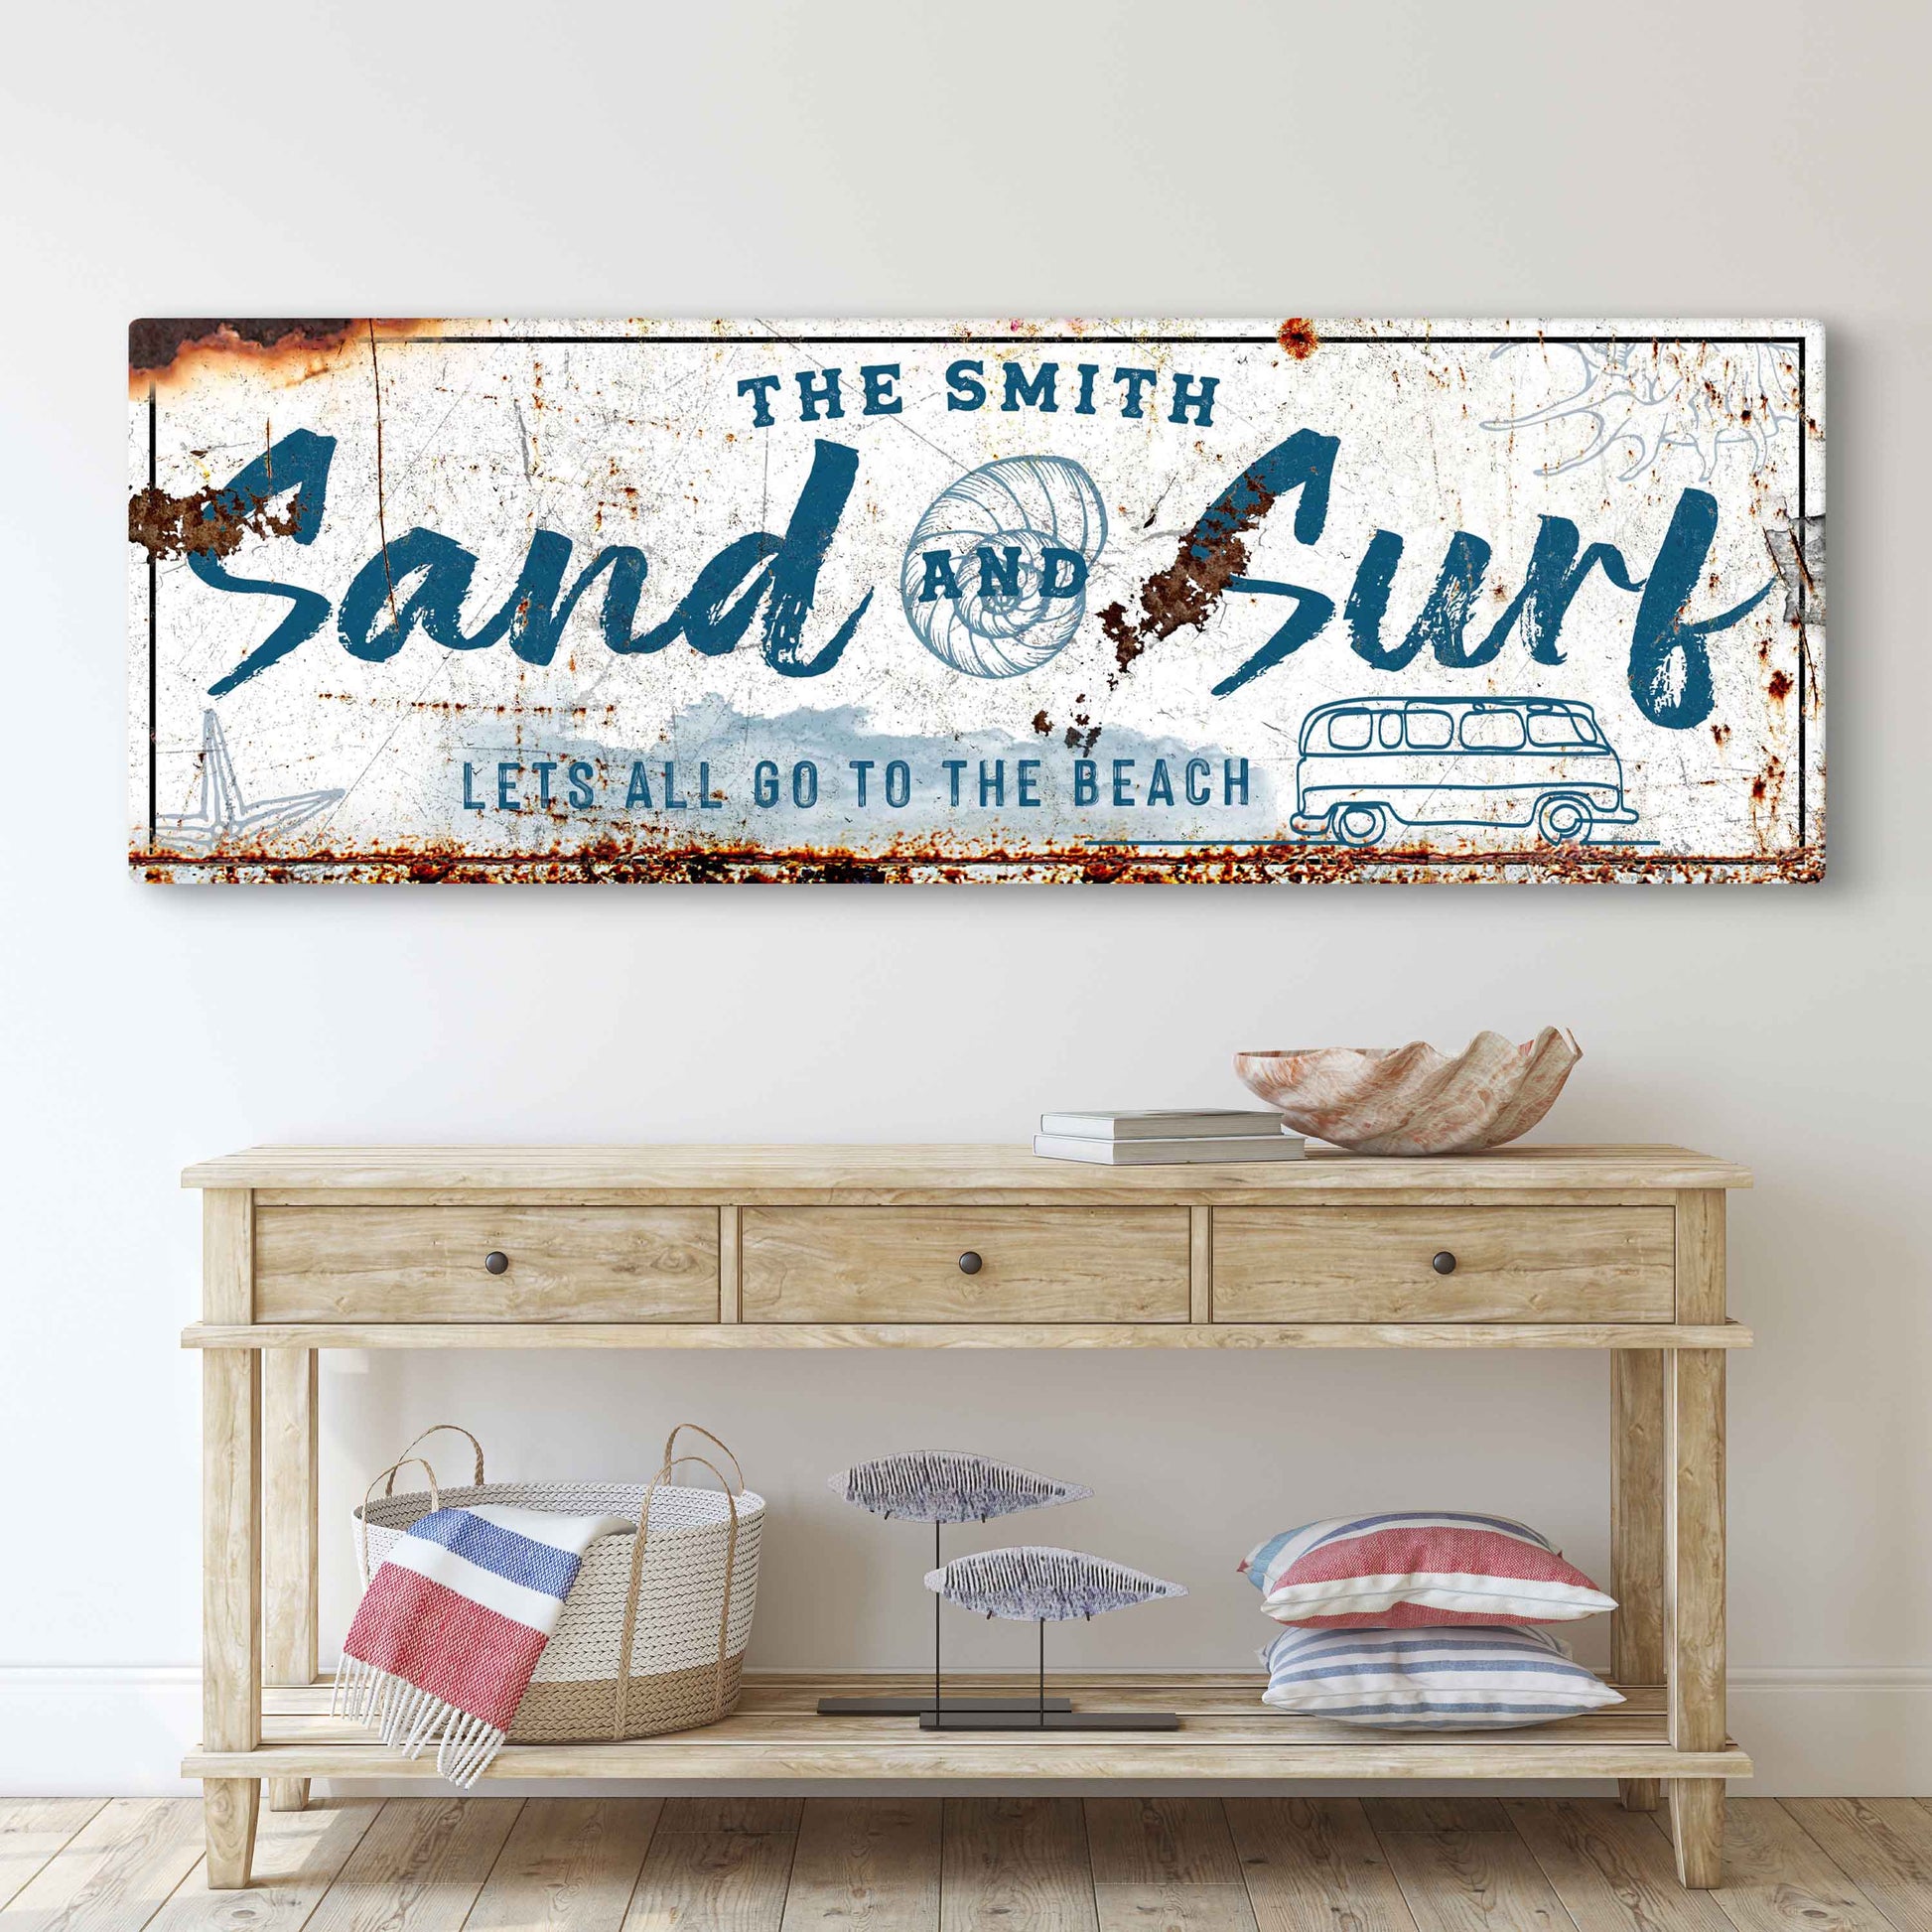 Rustic Sand and Surf Sign - Image by Tailored Canvases